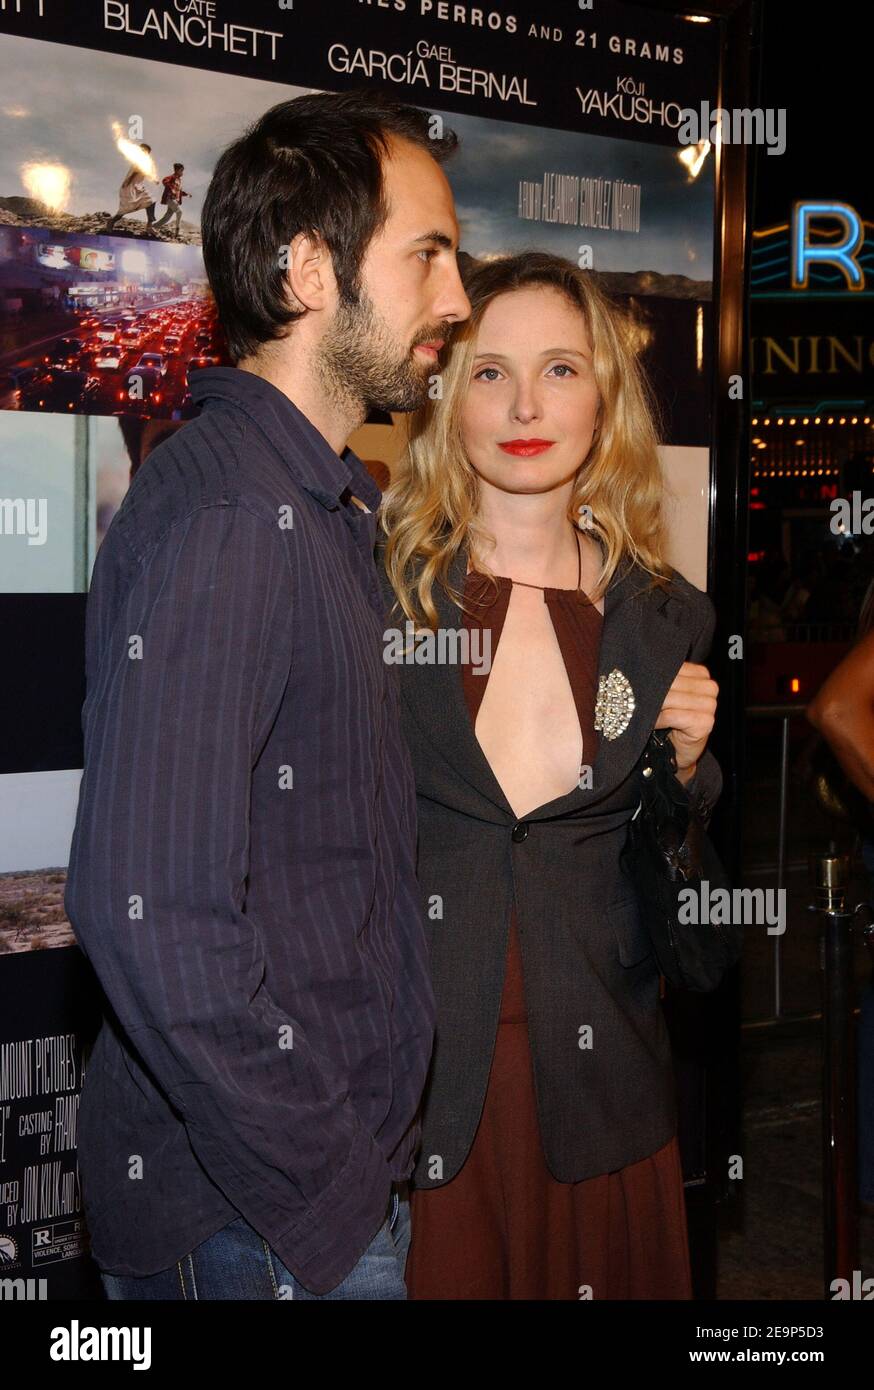 Julie Delpy and boyfriend Marc attend the premiere of 'Babel' at the Westwood Mann Village Theatre in Los Angeles, CA, USA on November 5, 2006. Photo by Lionel Hahn/ABACAPRESS.COM Stock Photo